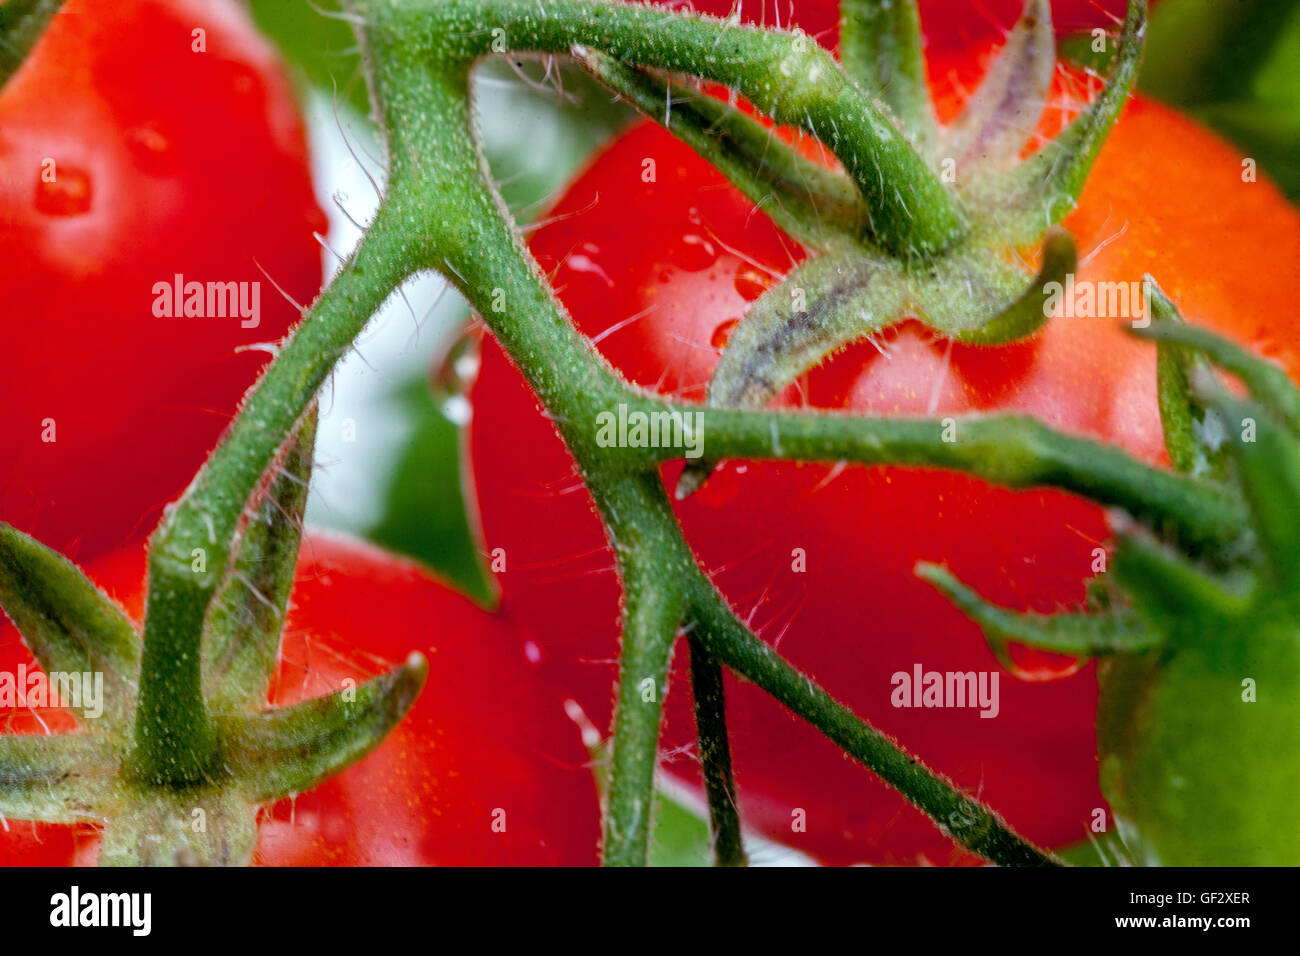 Cherry tomates naines sur branch, tomate Banque D'Images